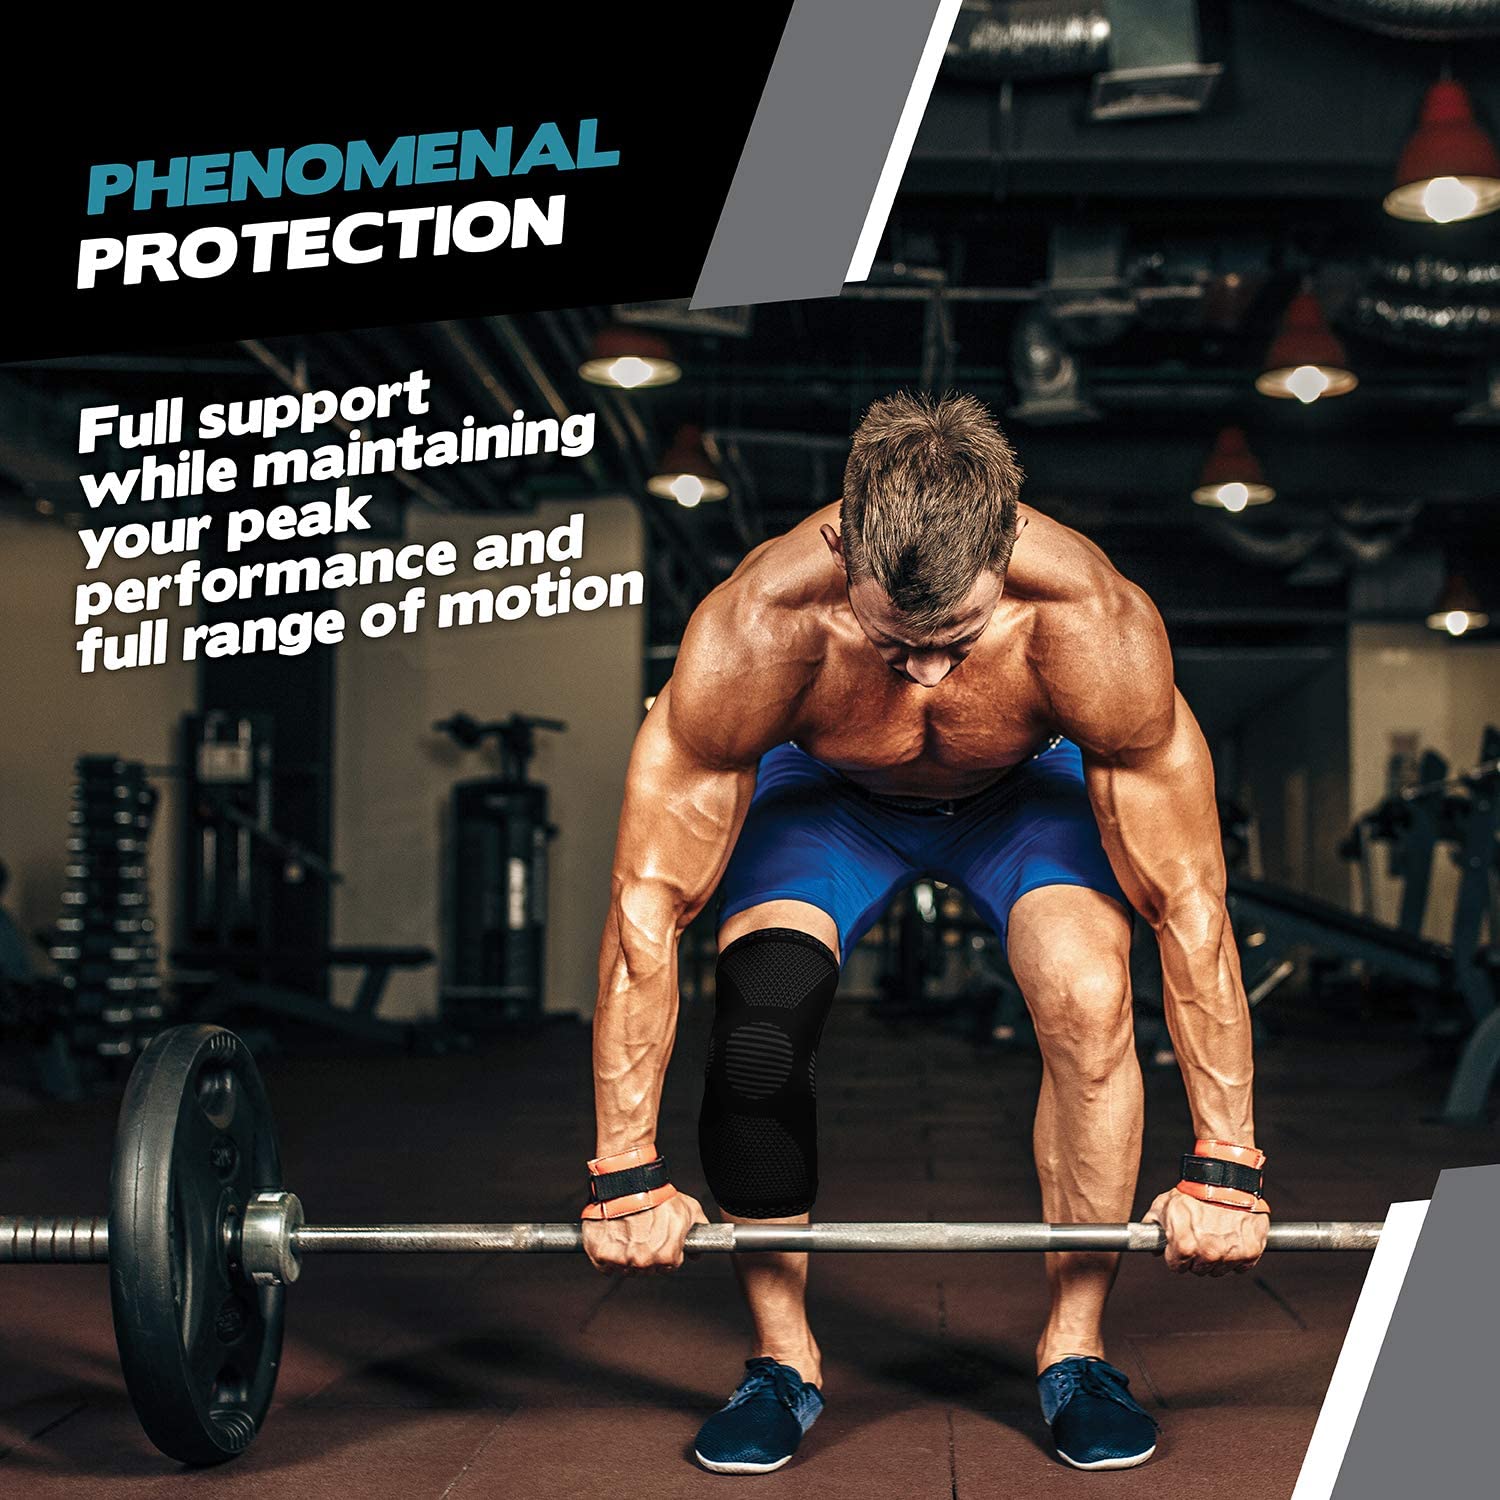 a person lifting a barbell with text: 'PHENOMENAL PROTECTION Full support while maintaining your peak performance and full range of motion'